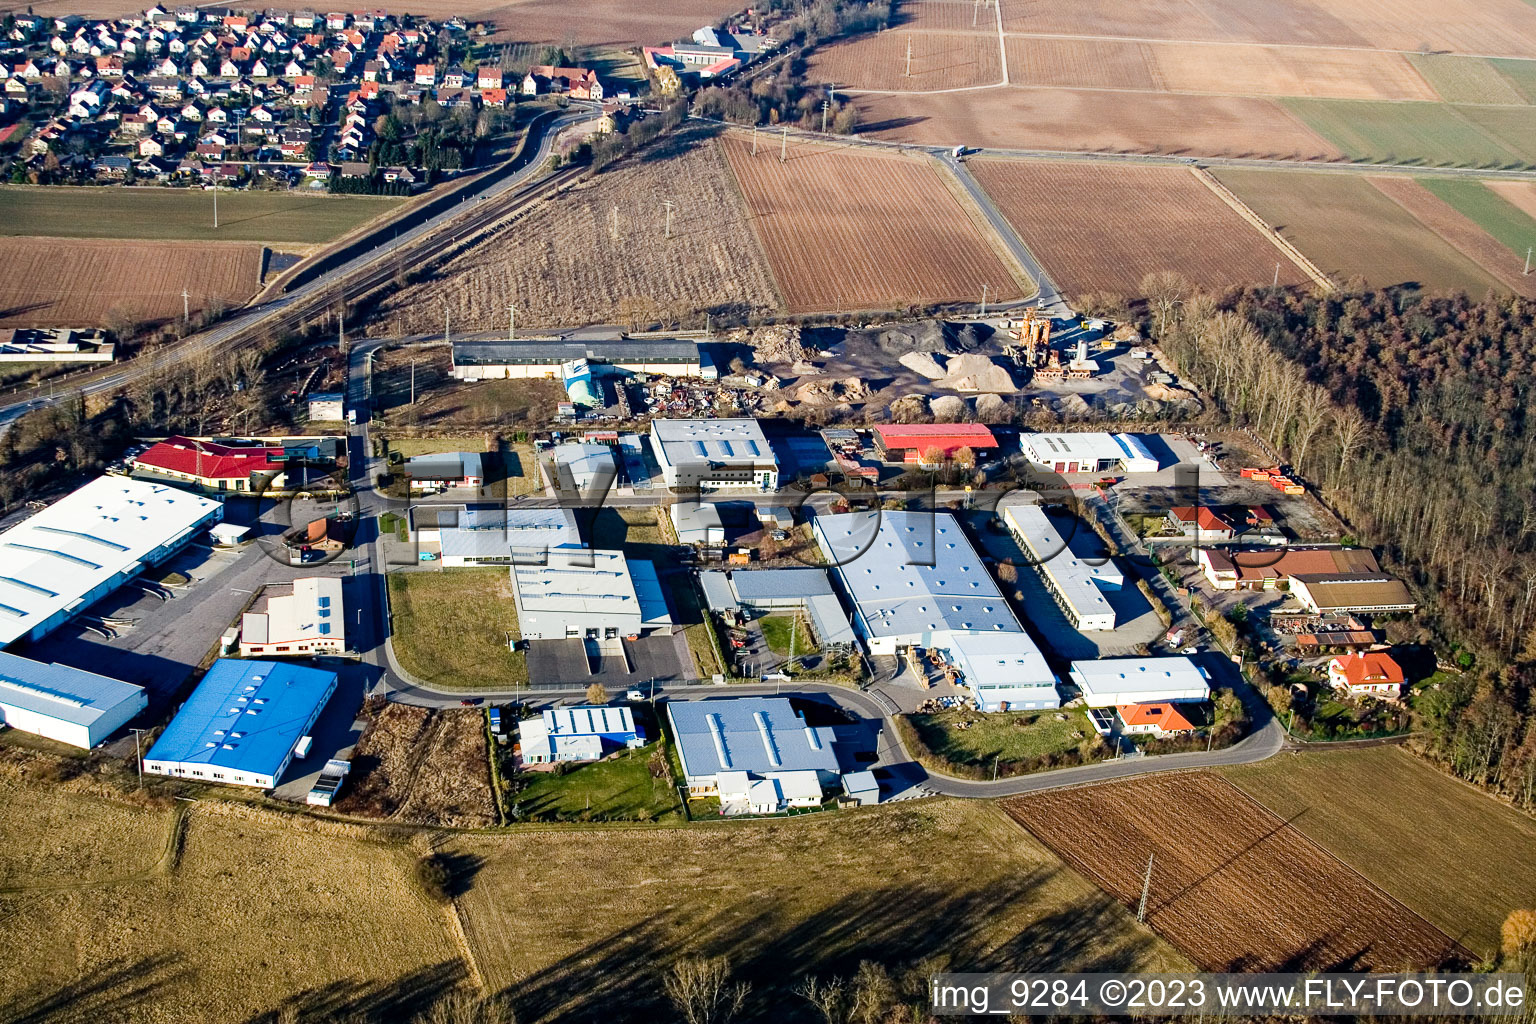 Industrial Estate in Rohrbach in the state Rhineland-Palatinate, Germany viewn from the air